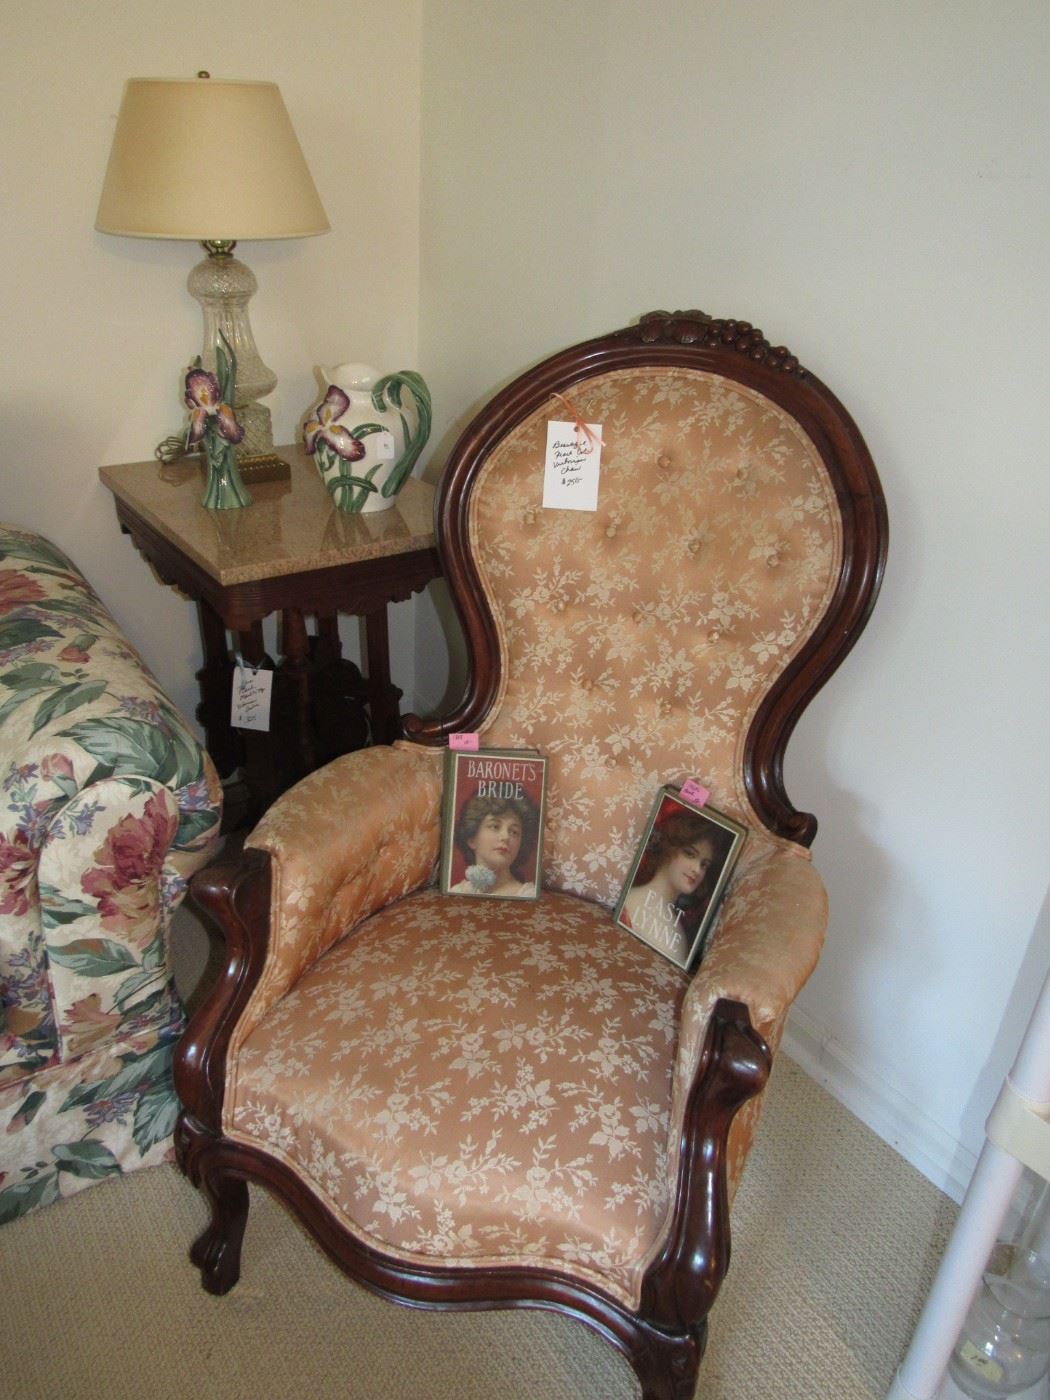 Beautiful Victorian chair, books, rare peach colored marble top Victorian table, Fitz and Floyd